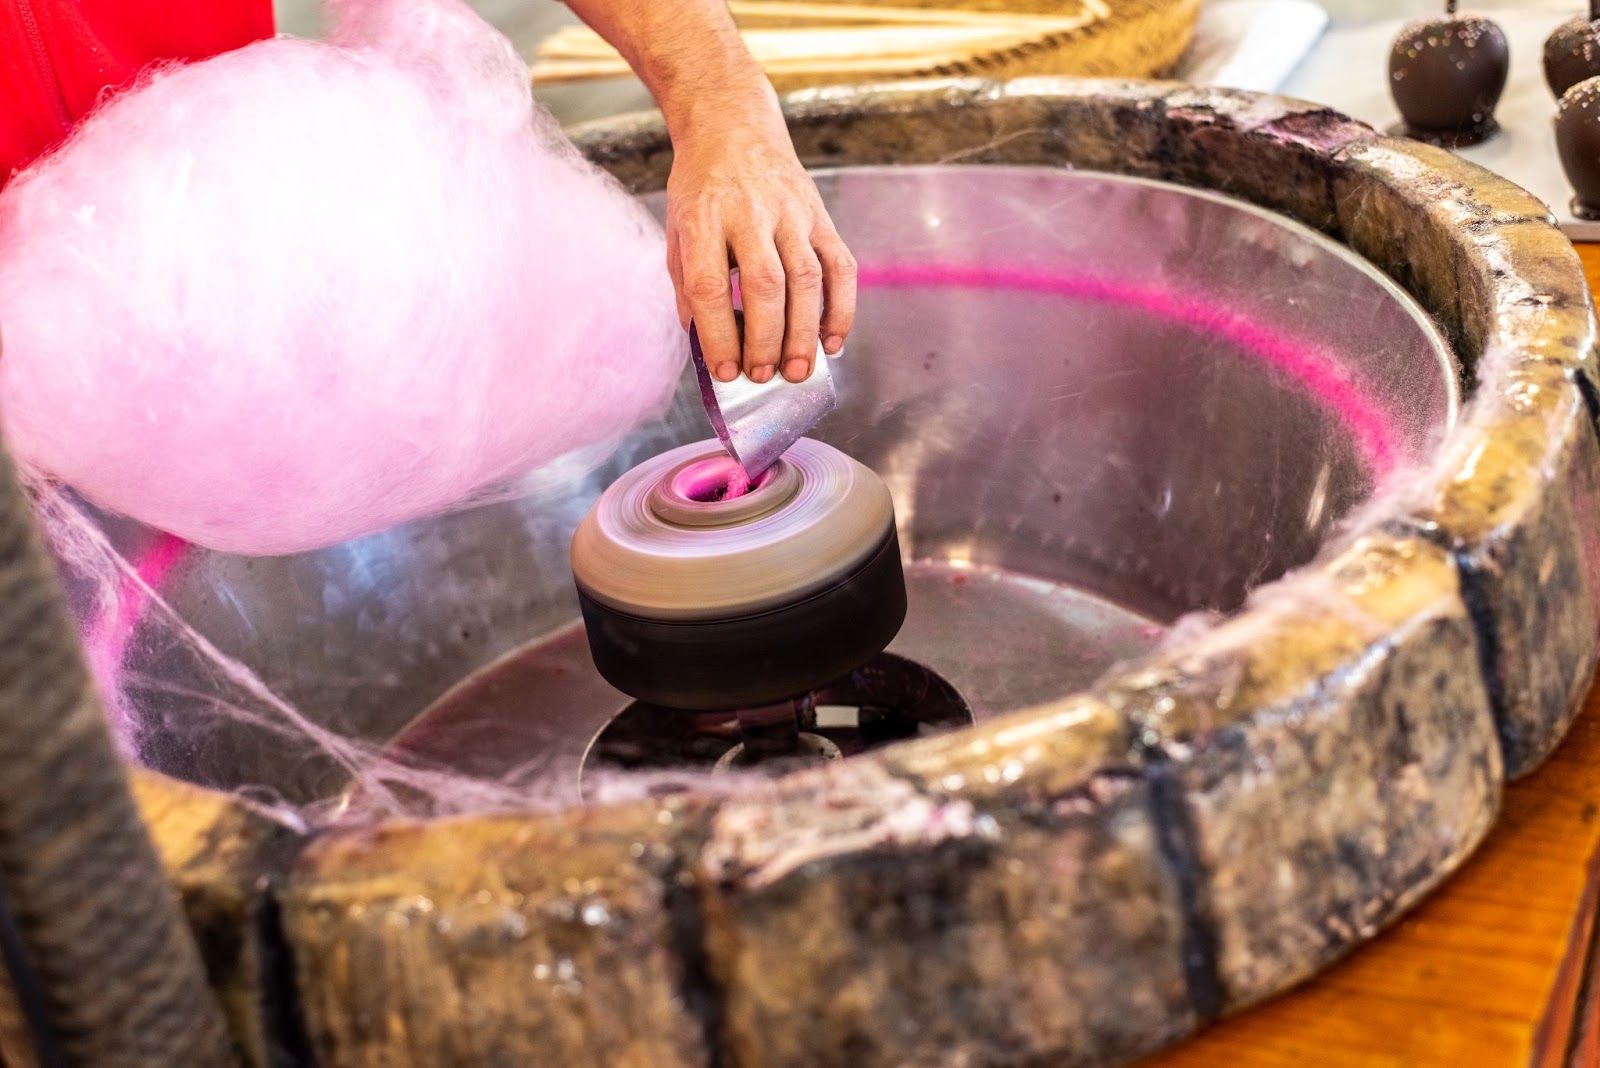 A vendor adds more sugar as he forms a pink cotton candy from the machine.